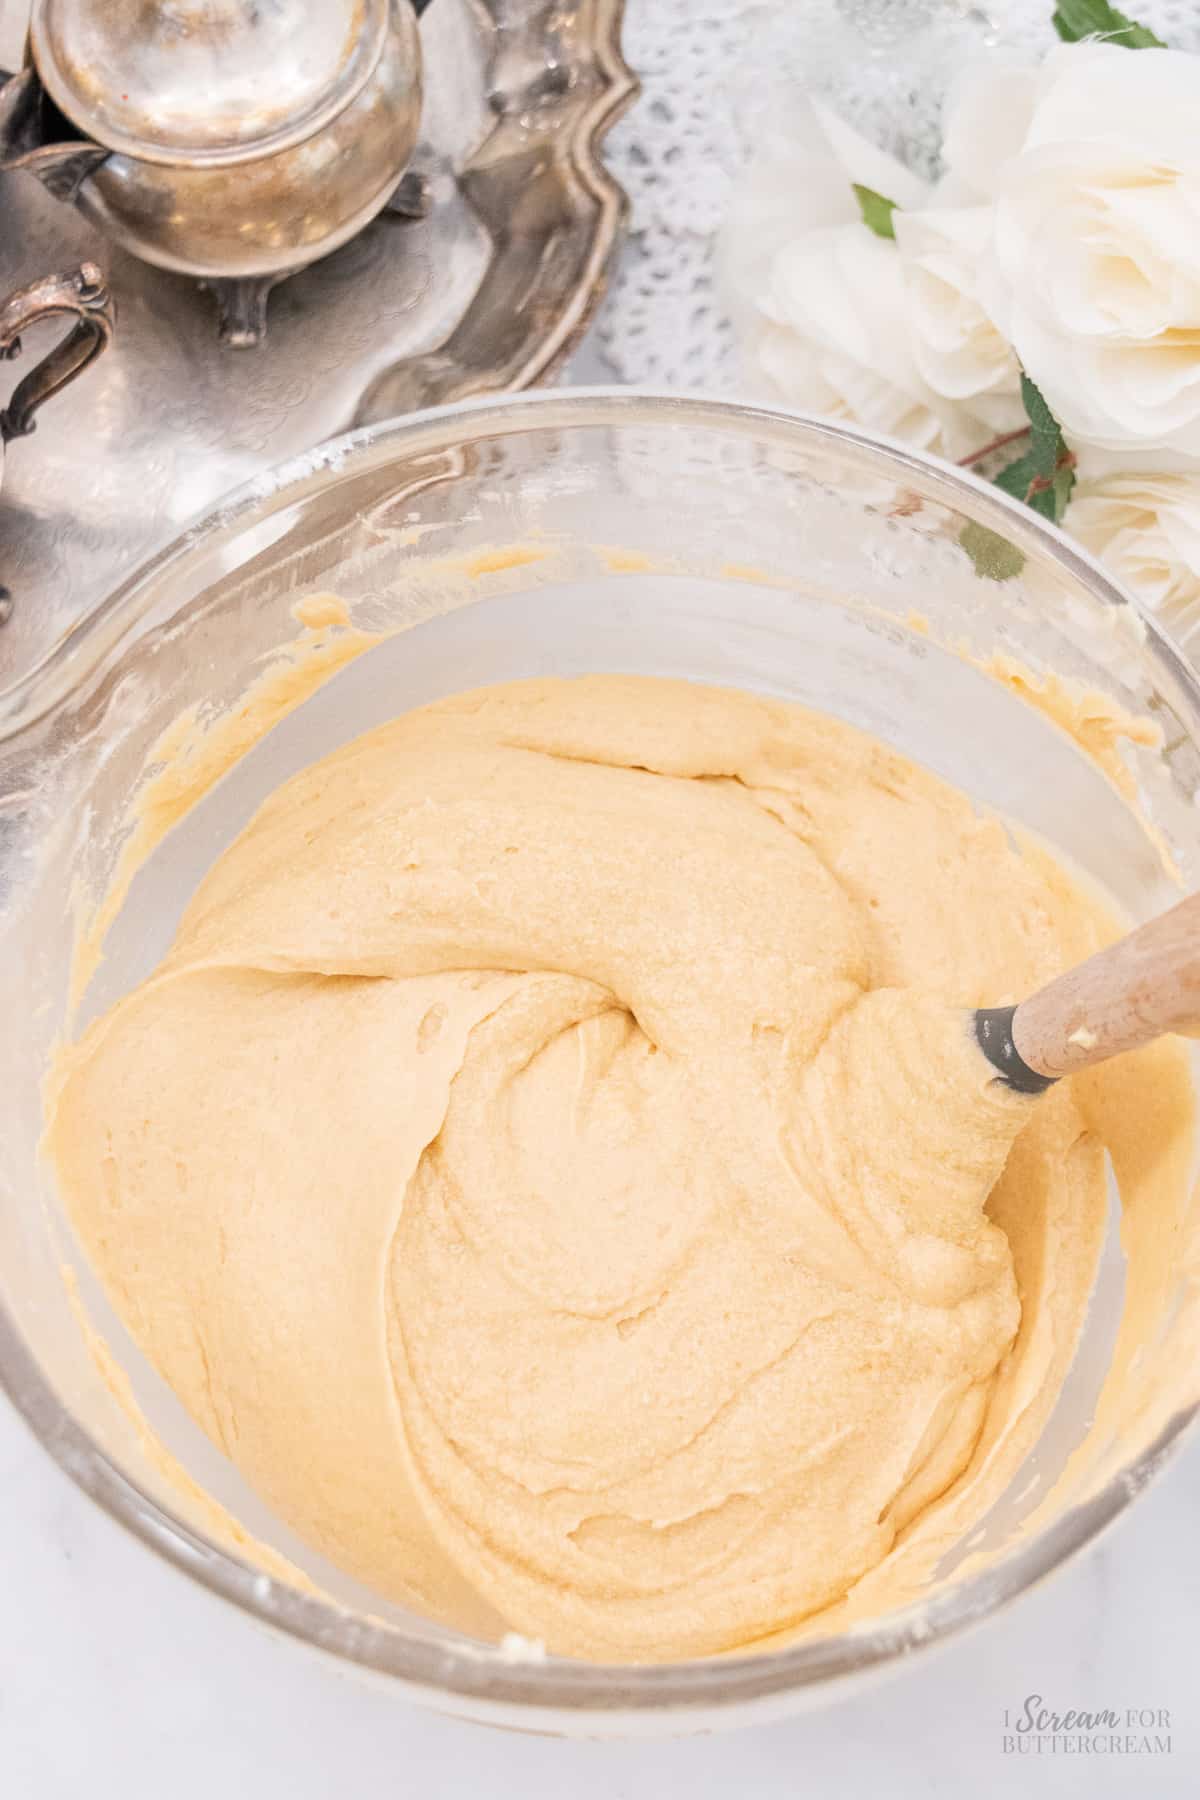 Mixed cake batter in a clear glass mixing bowl.